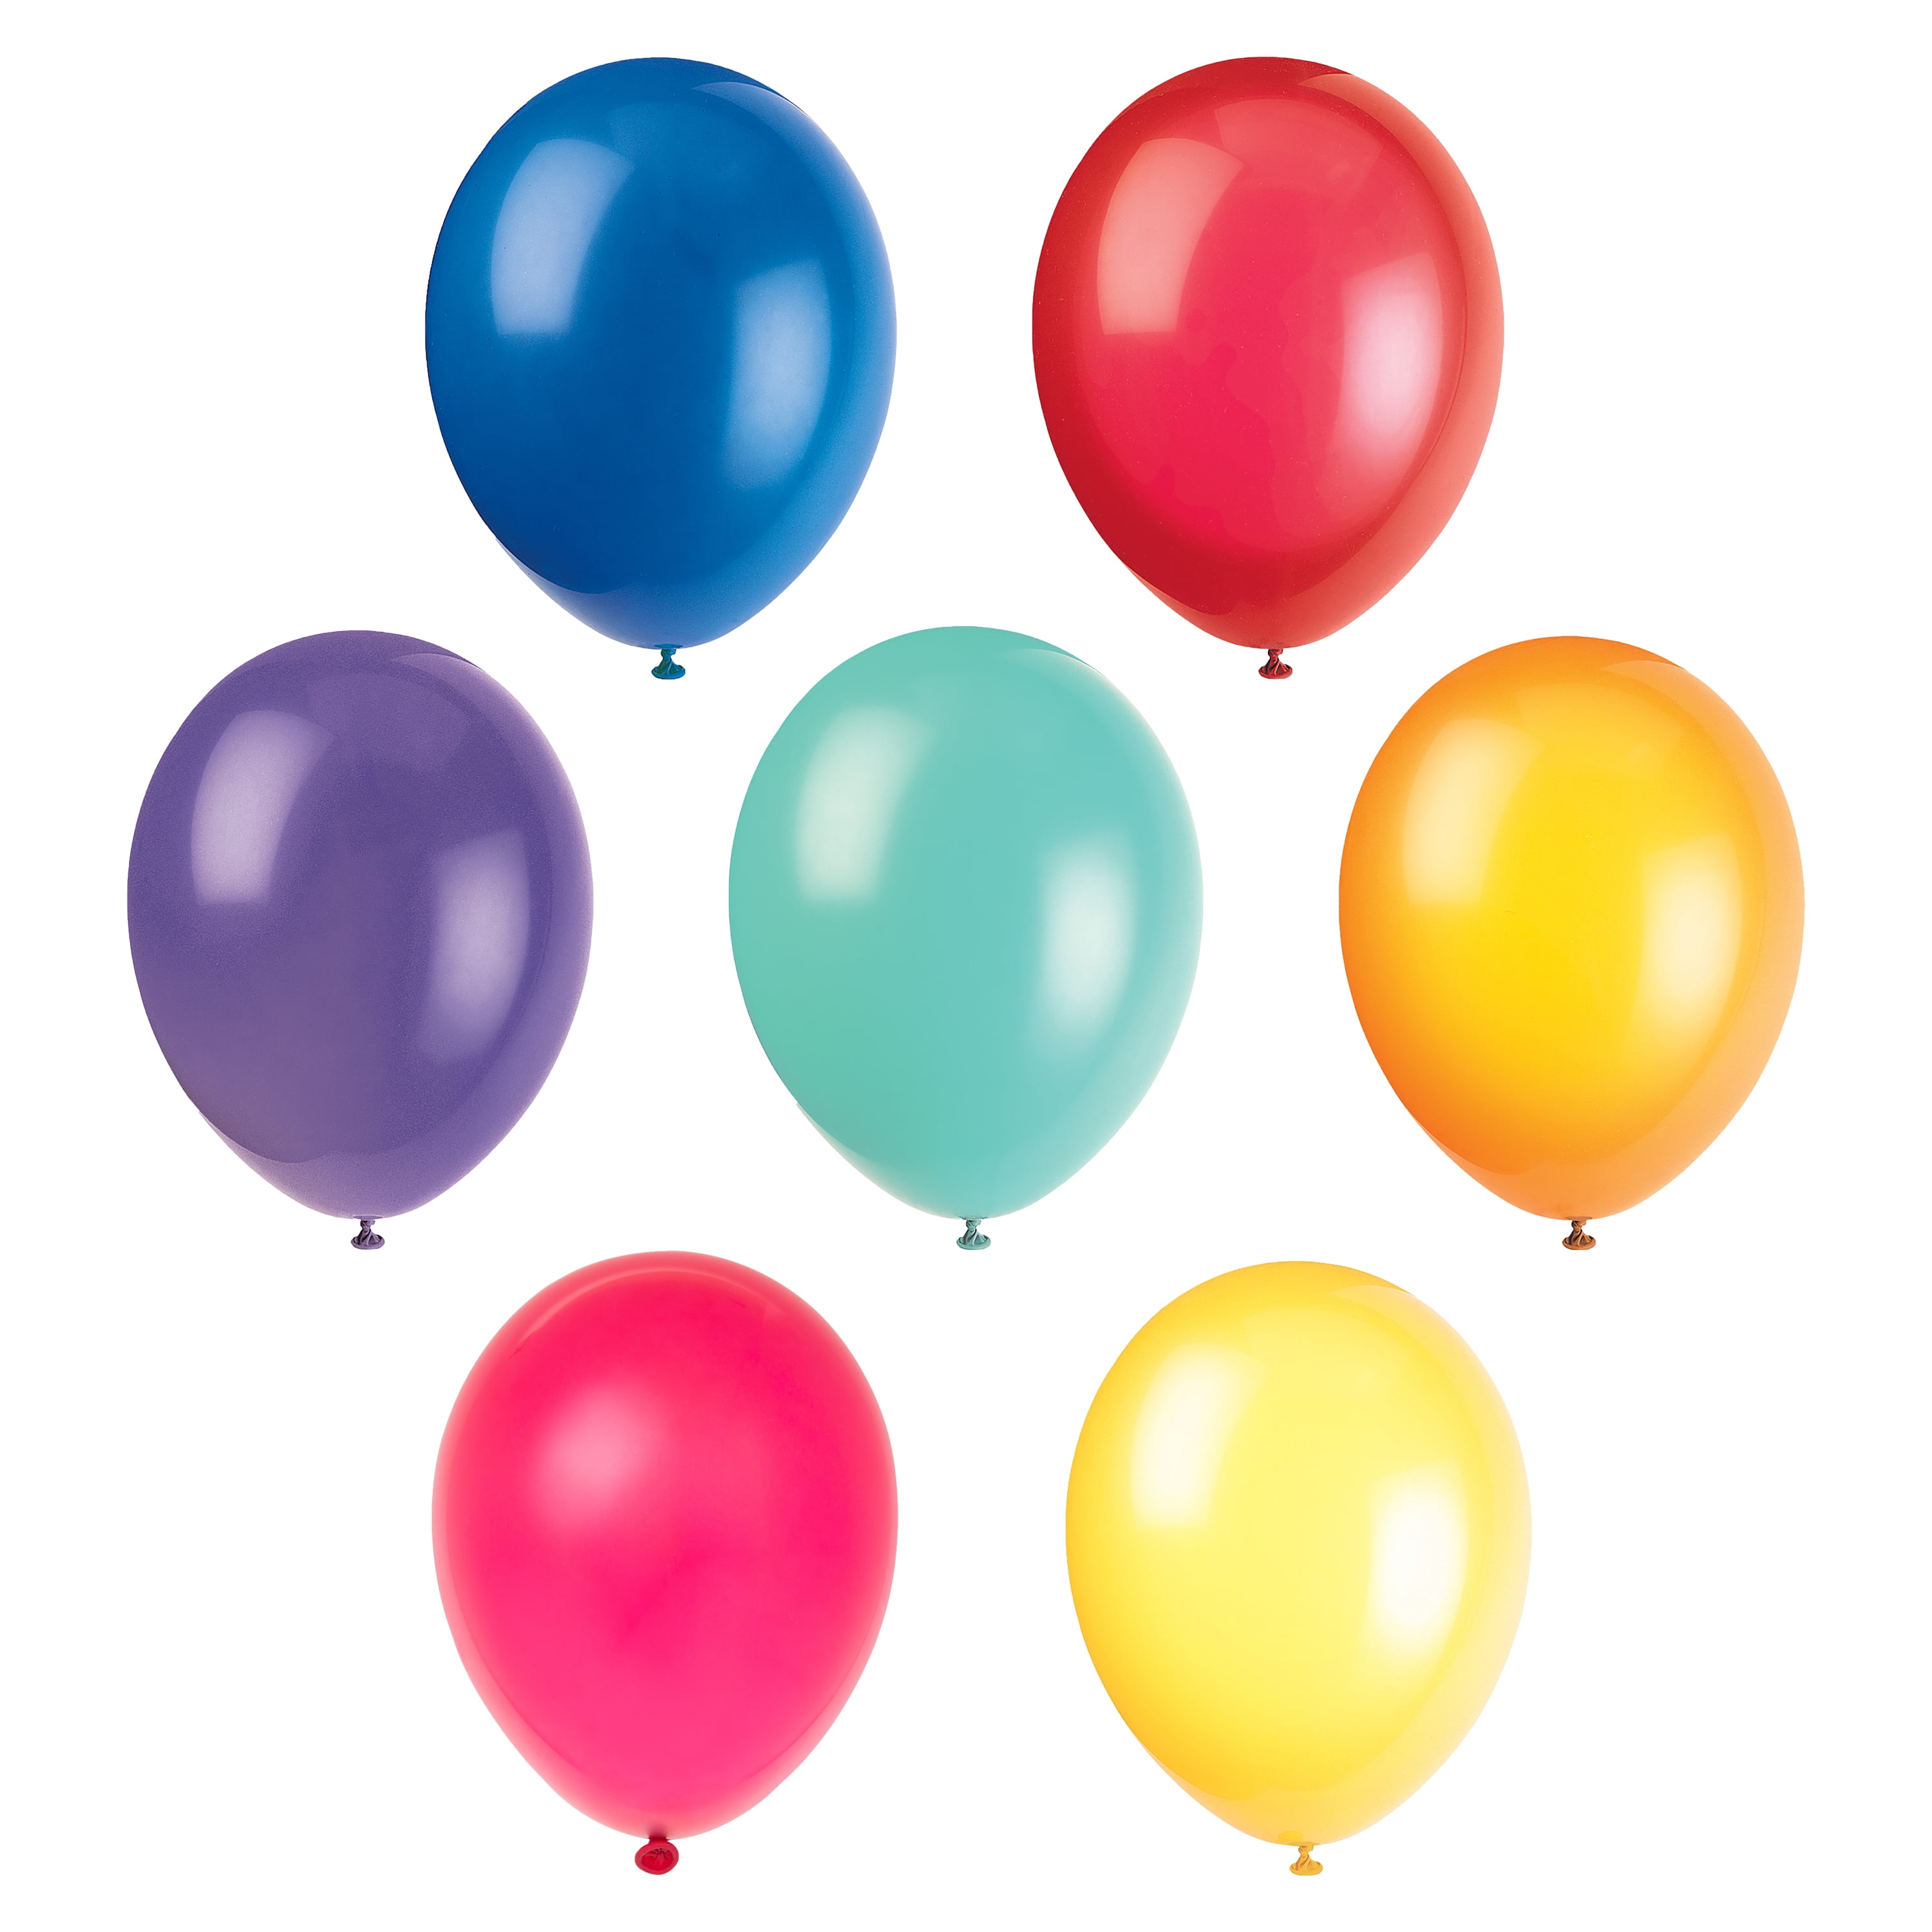 10 Pack of 12 Happy Birthday Balloons House Party Balloons Childrens Birthday Supplies Kids Birthday Decor Multicoloured Latex Balloons